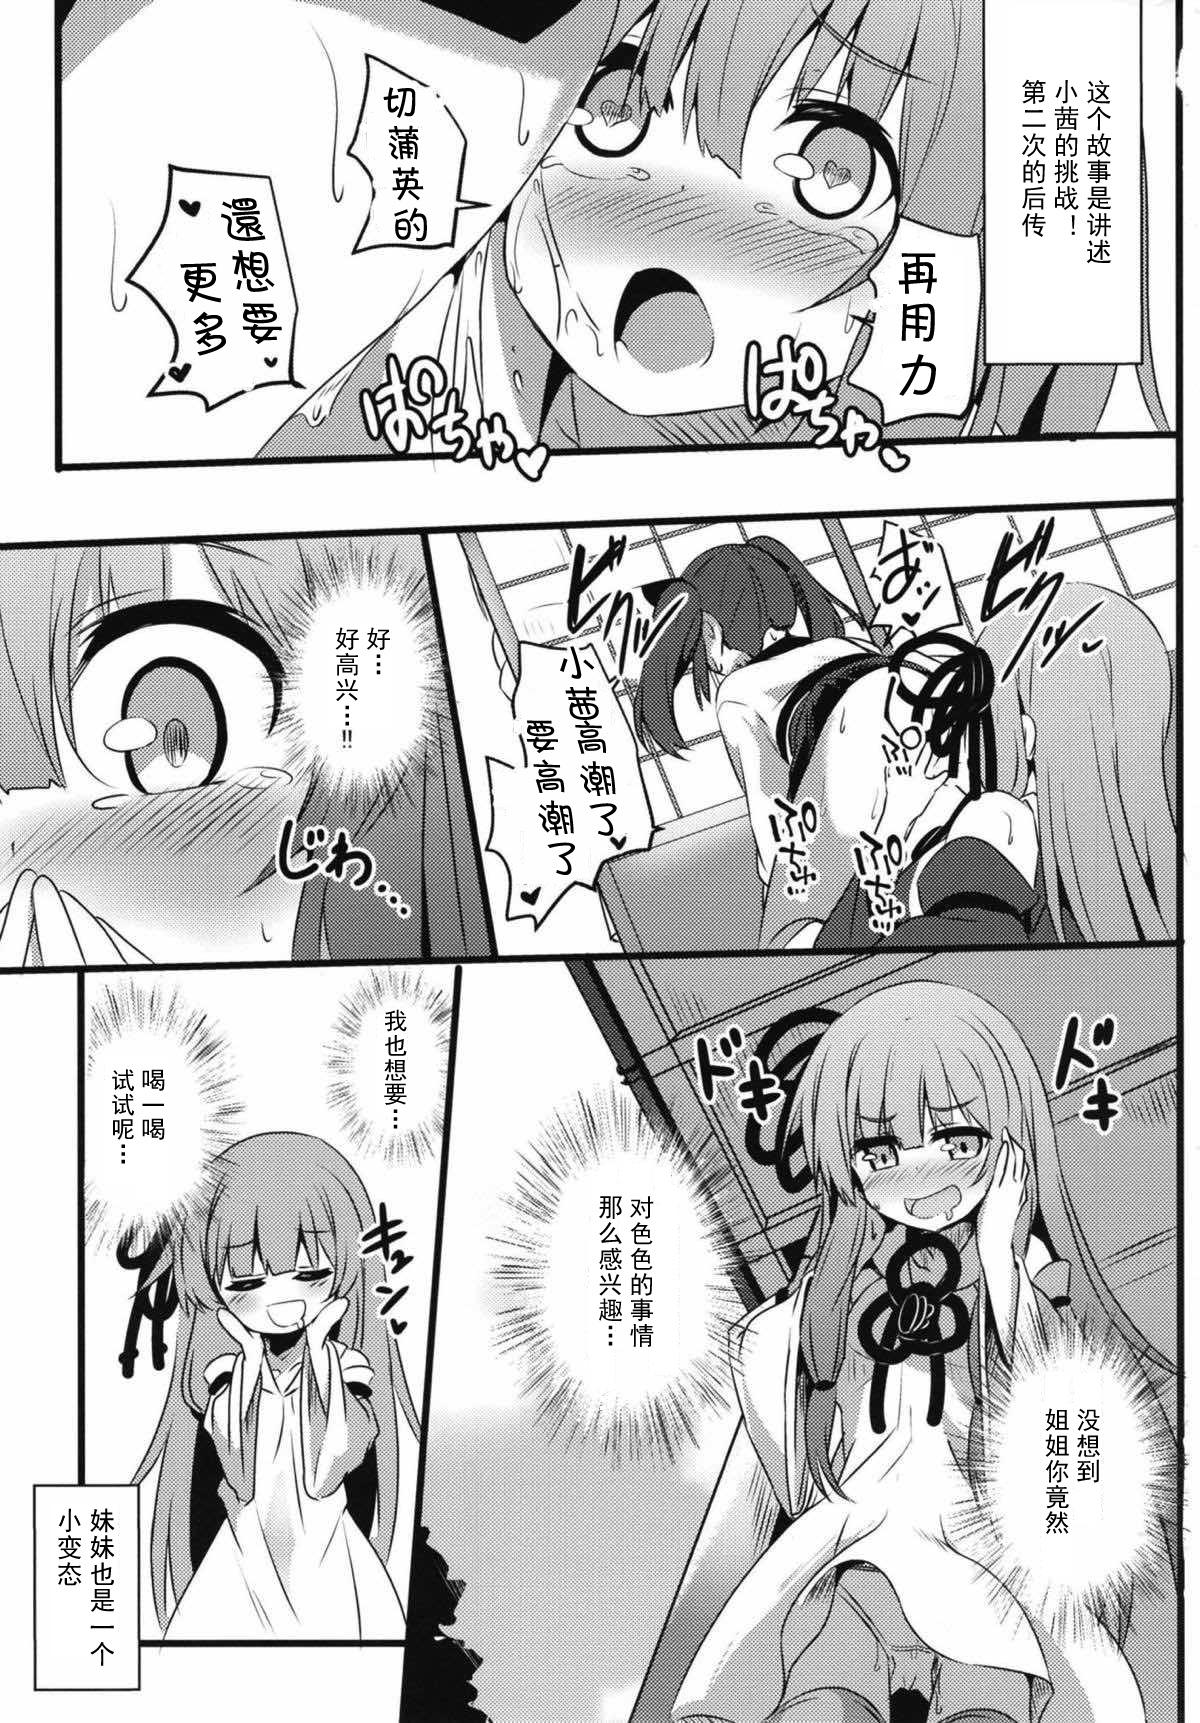 Indian (Kotonoha's Festa 2) [Milk Pudding (Jamcy)] Akane-chan Challenge! 2.5-kaime (VOICEROID) [Chinese] [古早个人汉化] - Voiceroid Hot Naked Women - Page 3